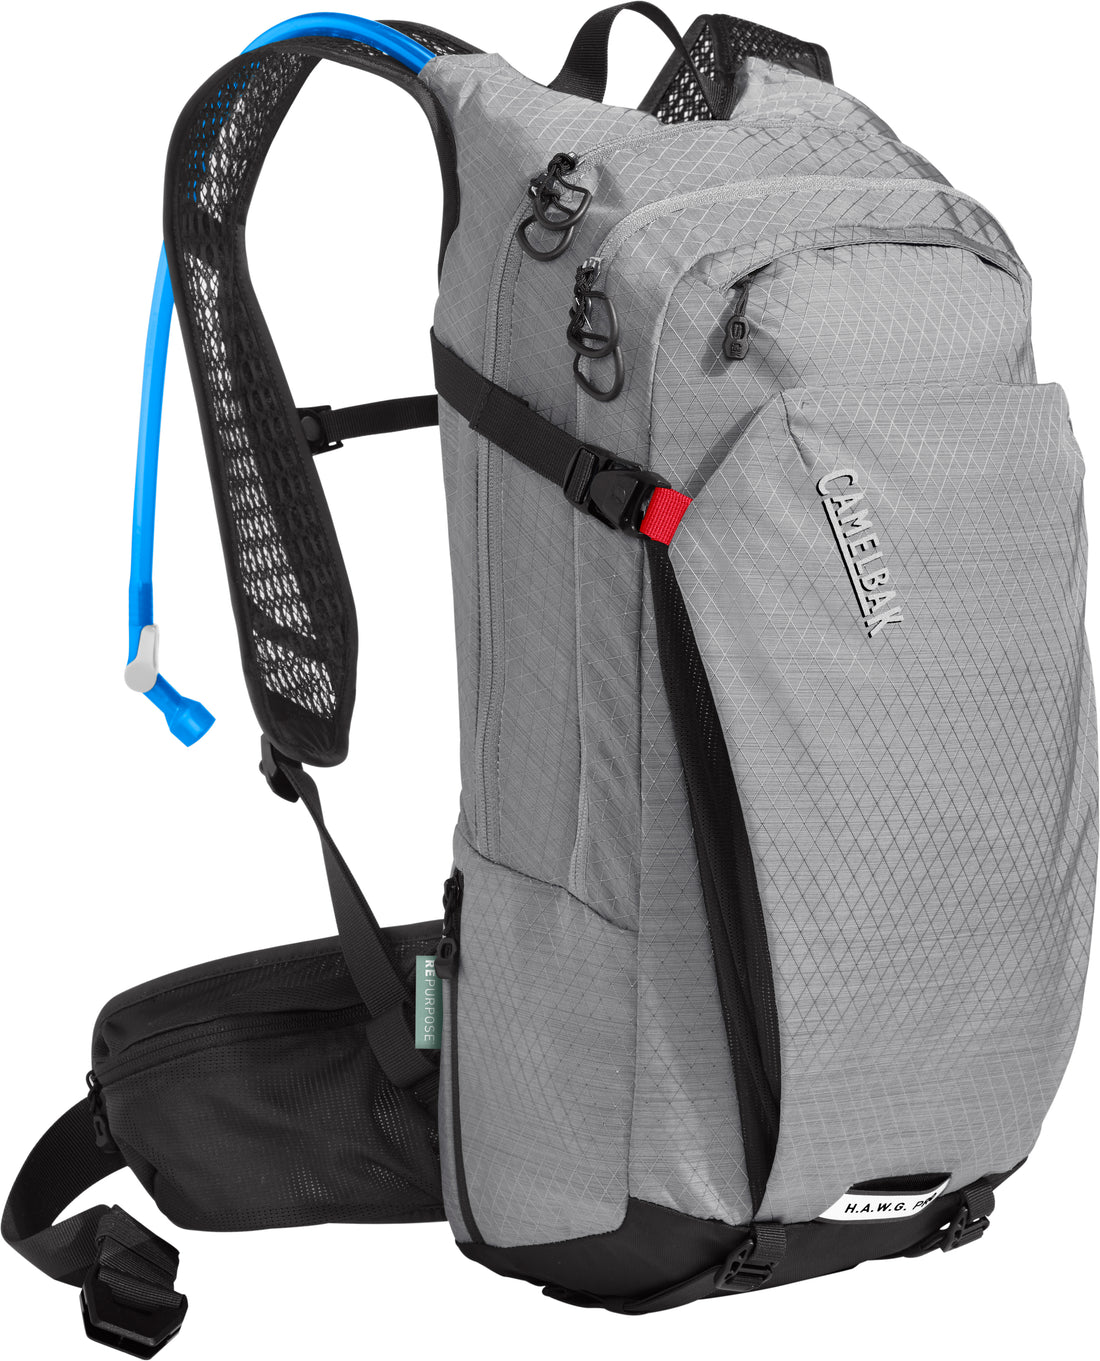 Camelbak|H.A.W.G.®_PRO_20|Cycle_LM